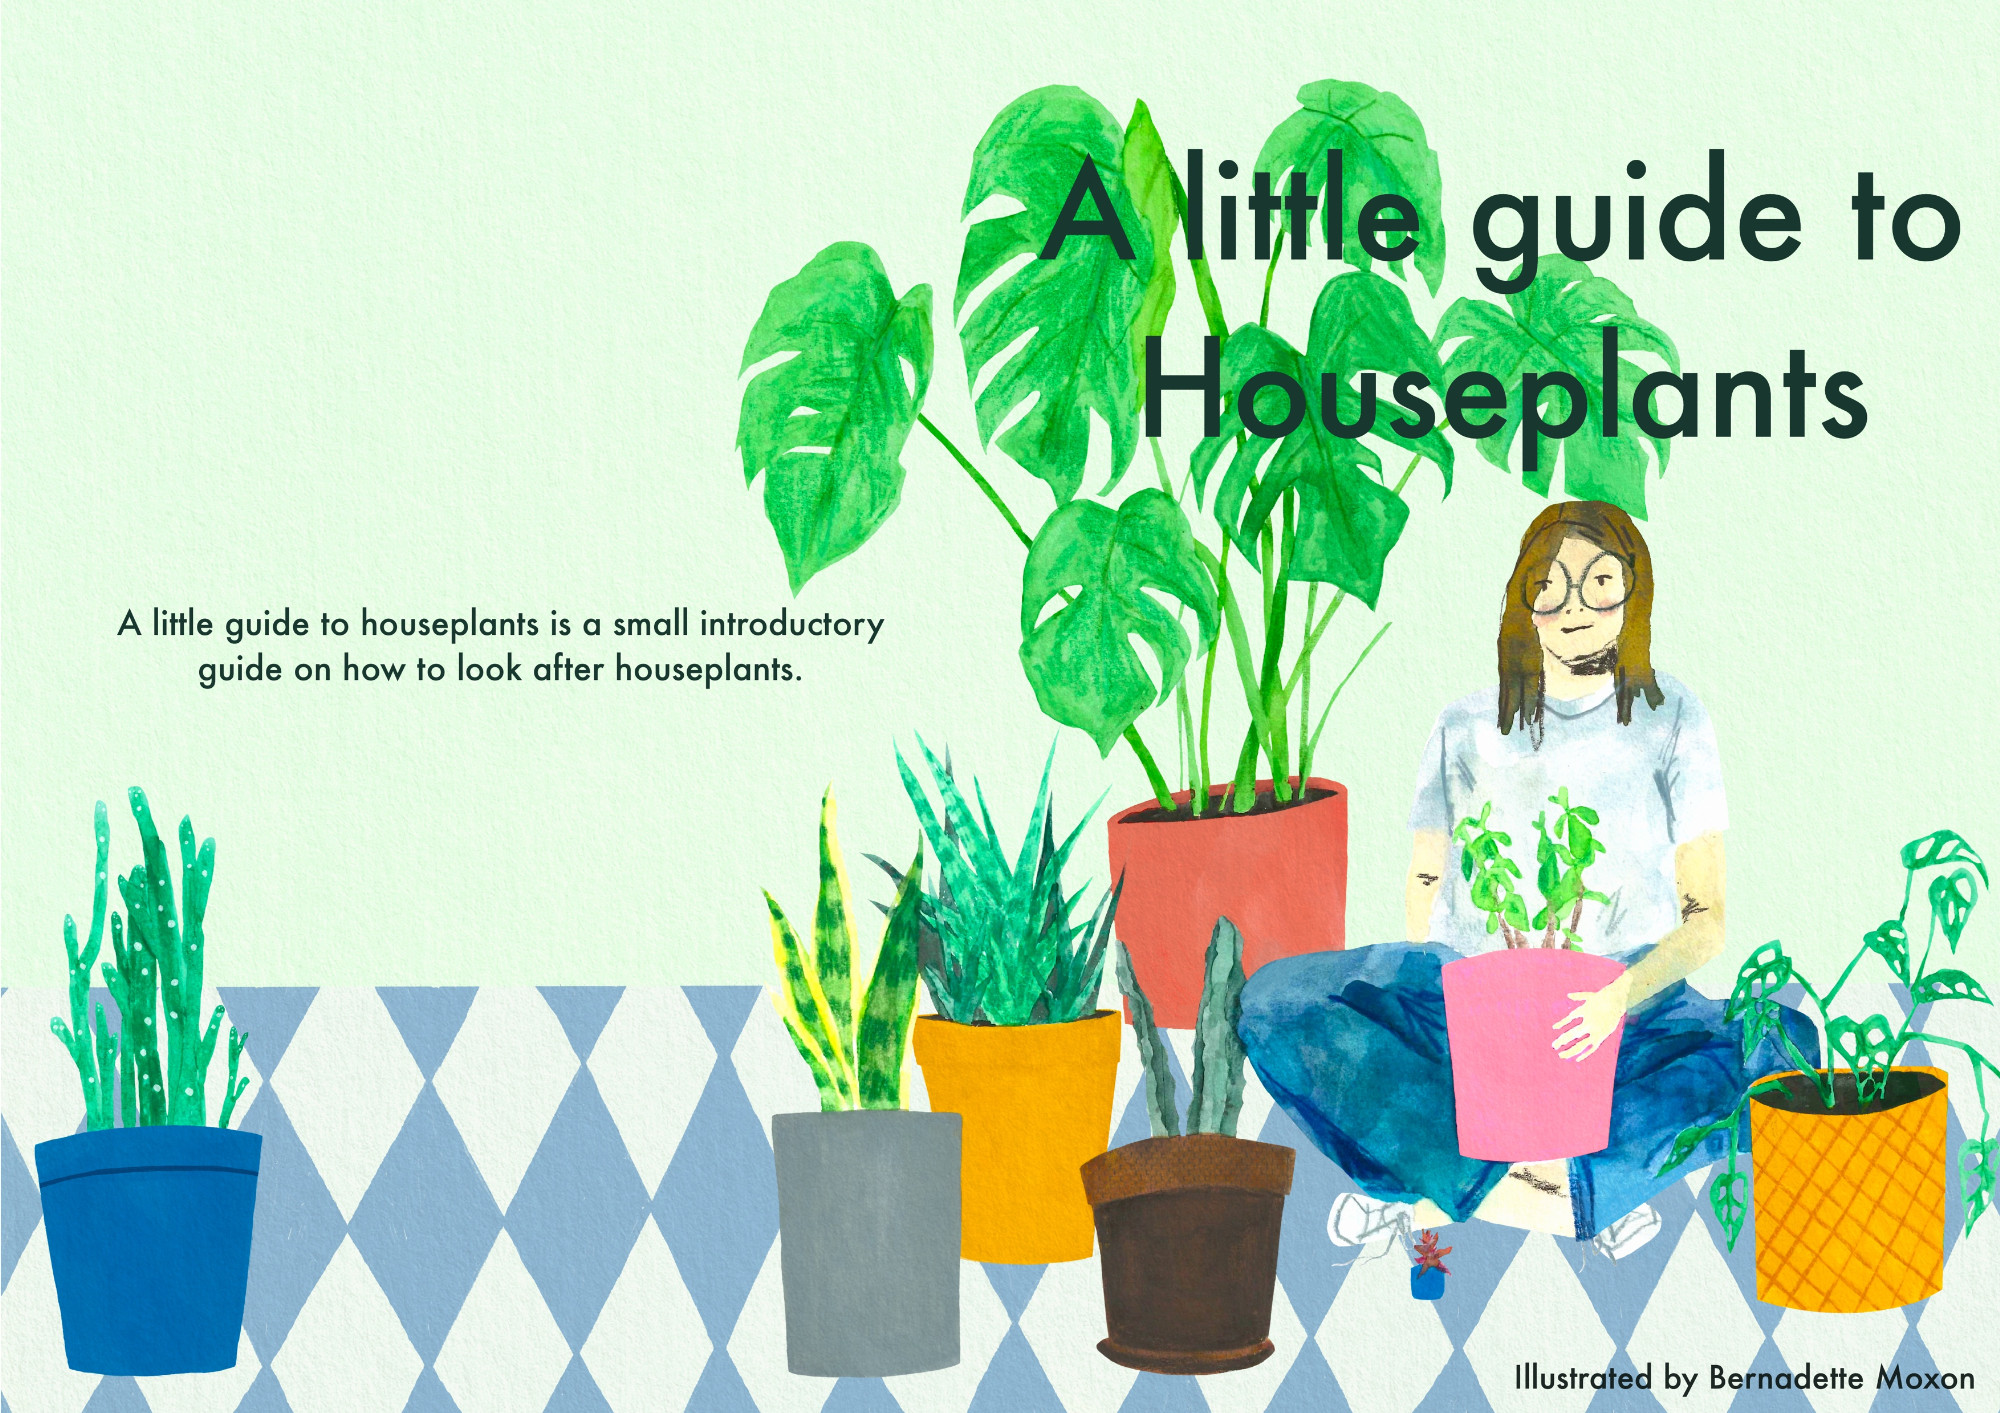 The cover for my final project ‘a little guide to Houseplants’.